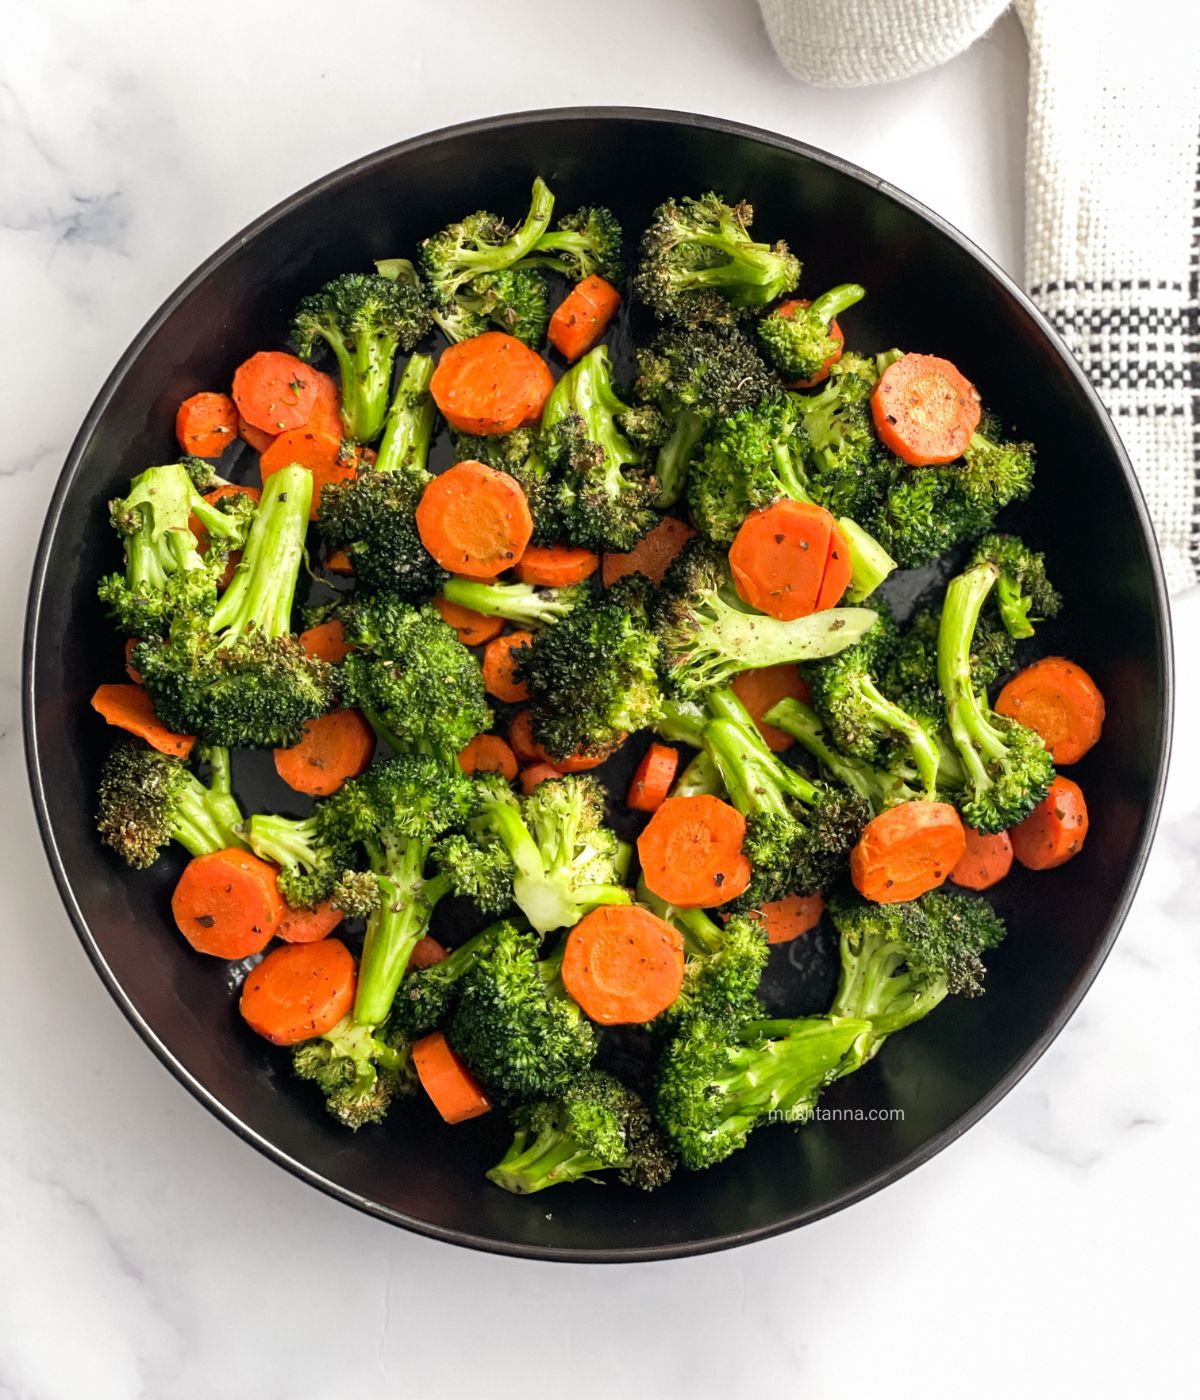 The plate has air fried carrots and broccoli.